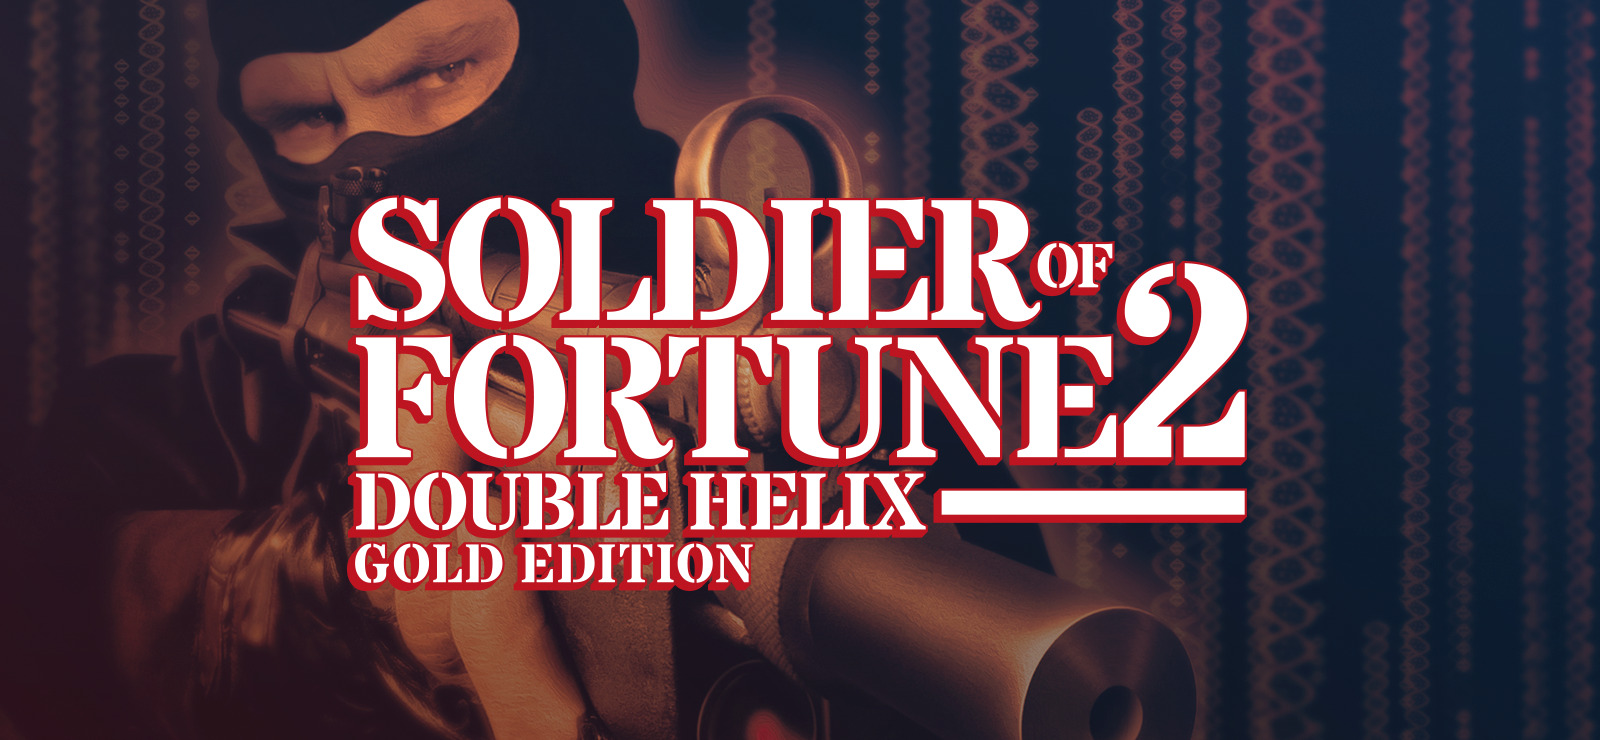 soldier of fortune 1 free download